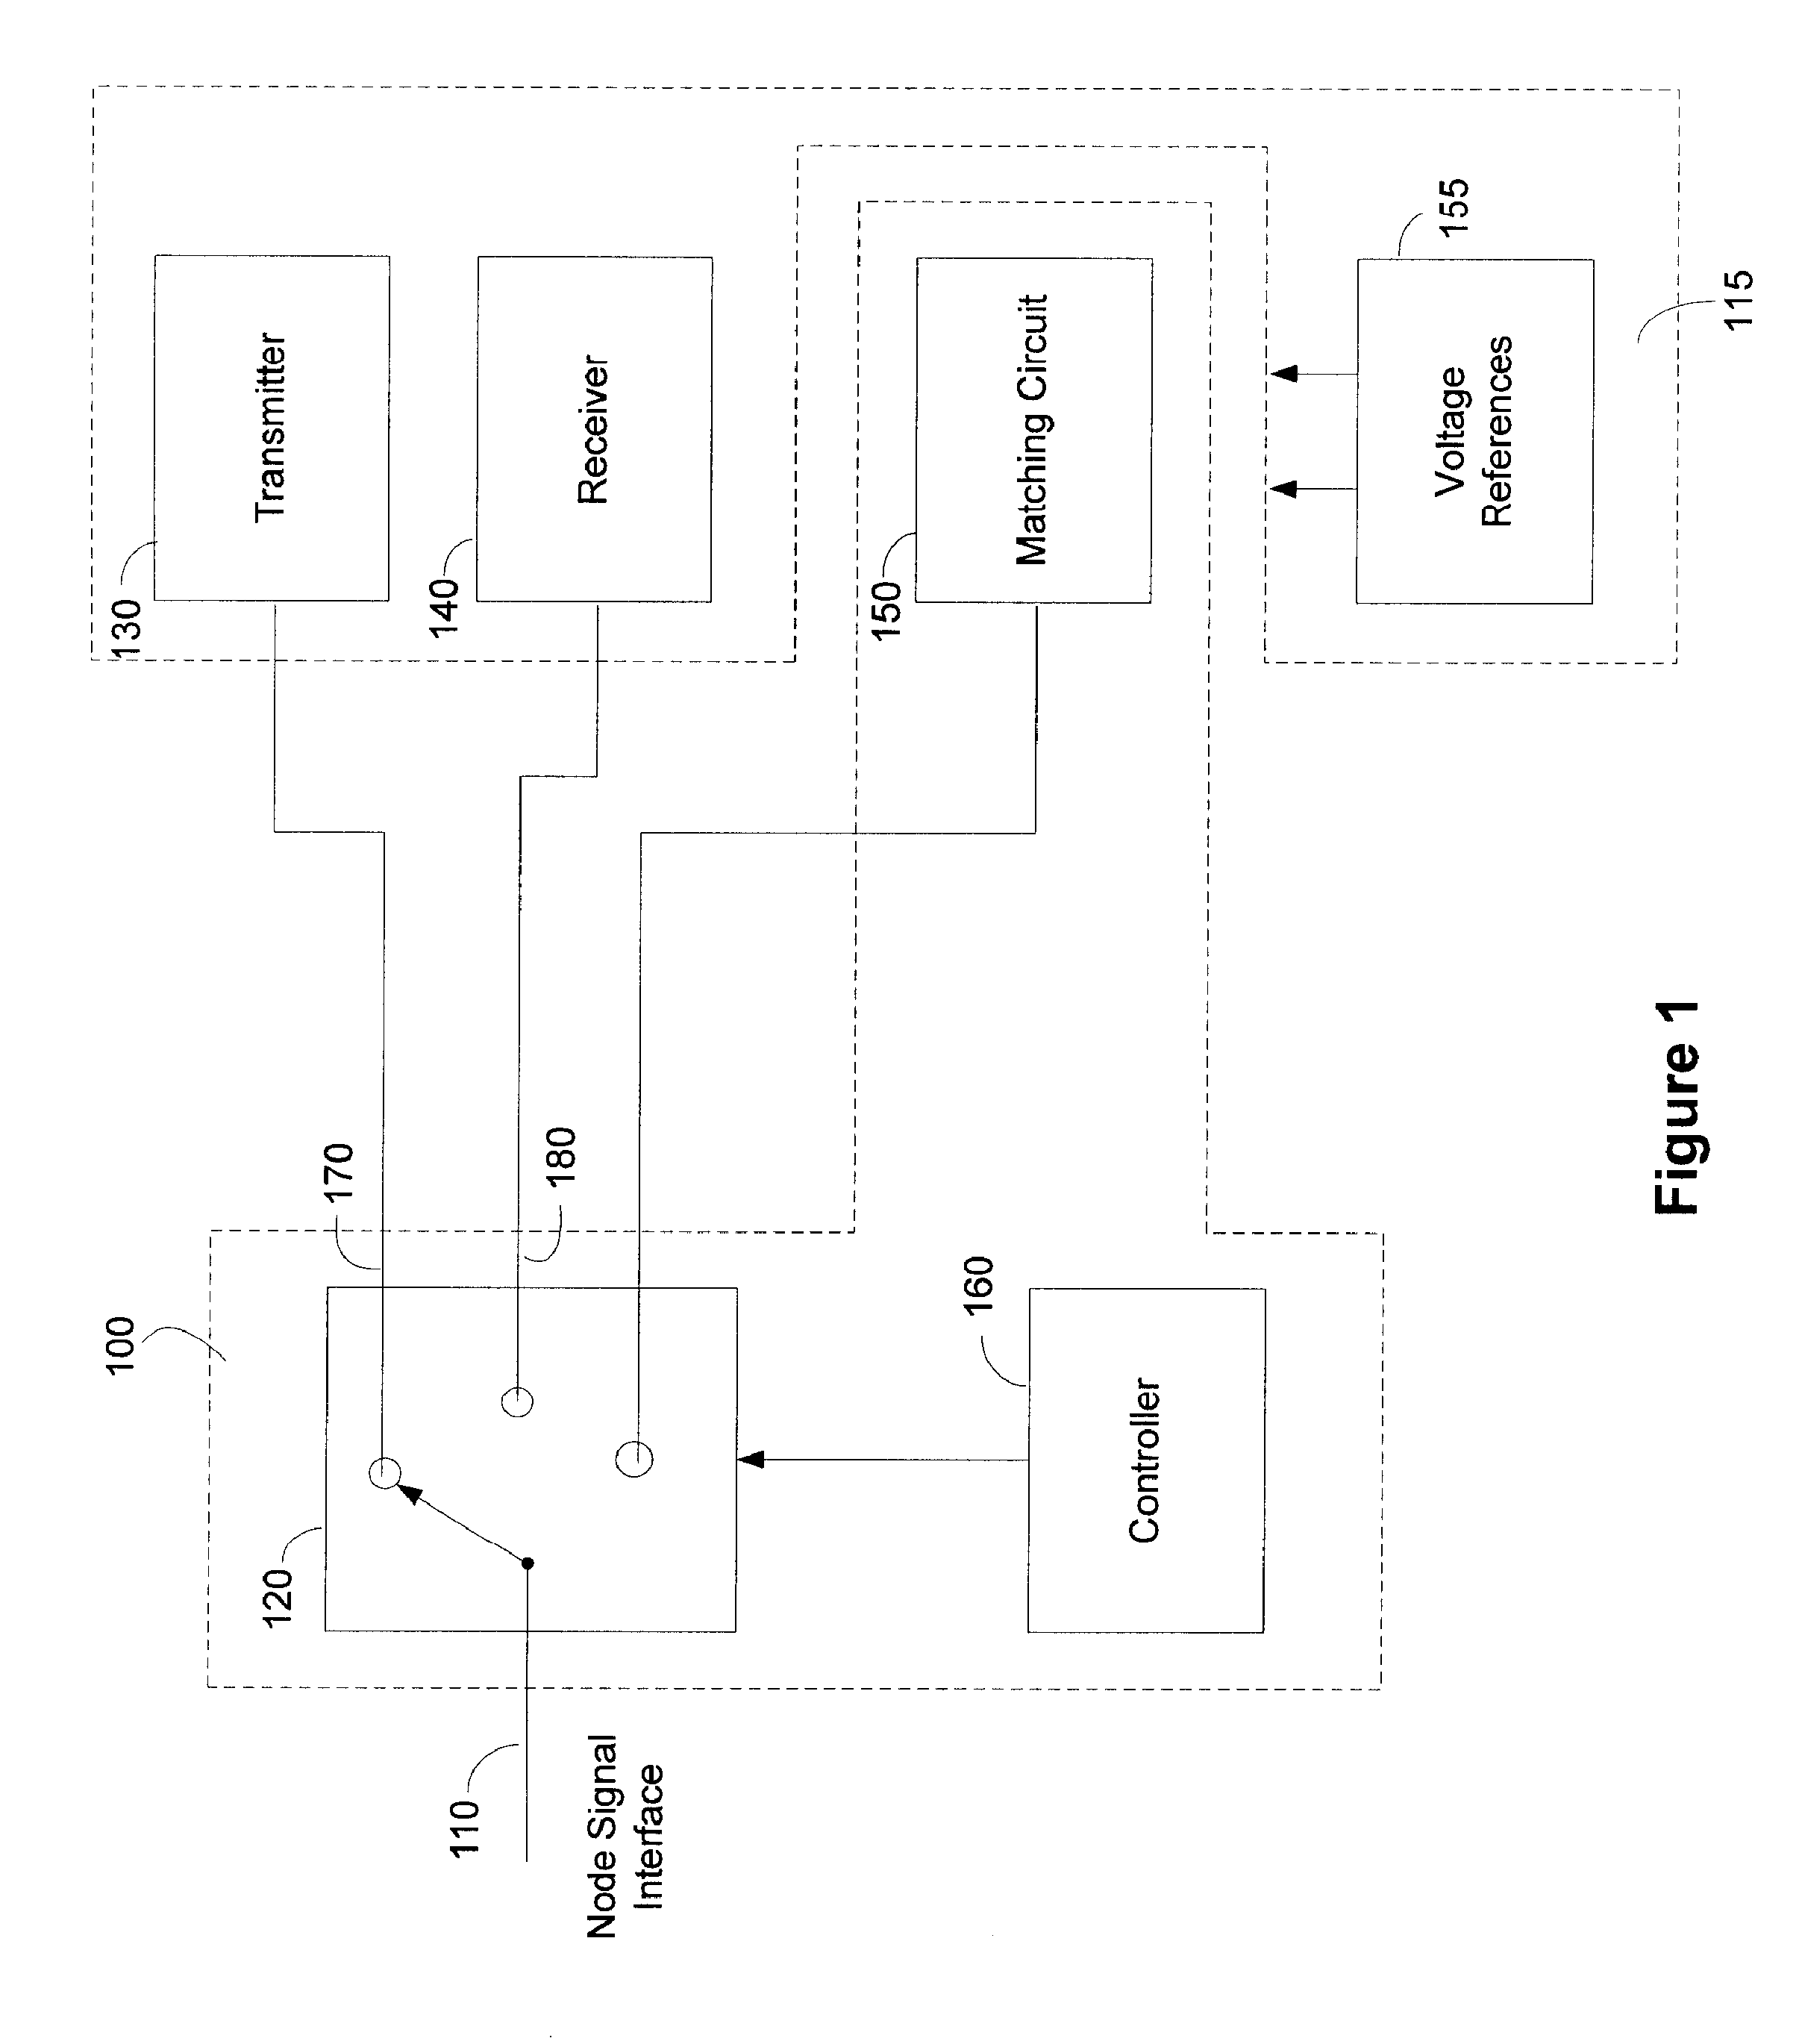 Impedance control for signal interface of a network node